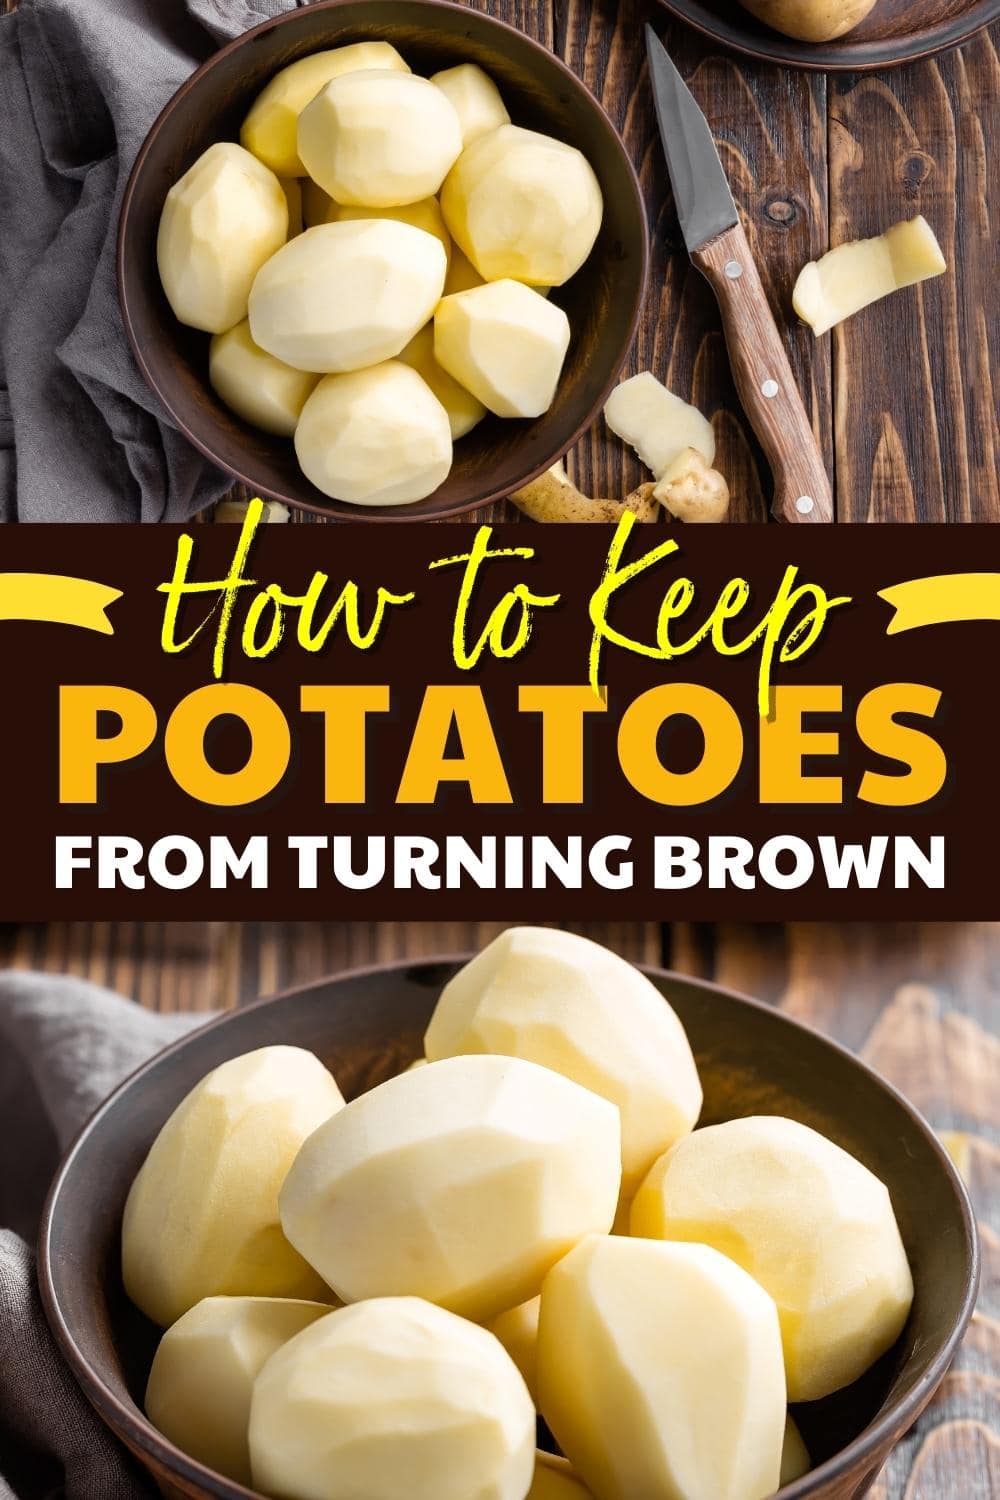 How to Keep Potatoes From Turning Brown